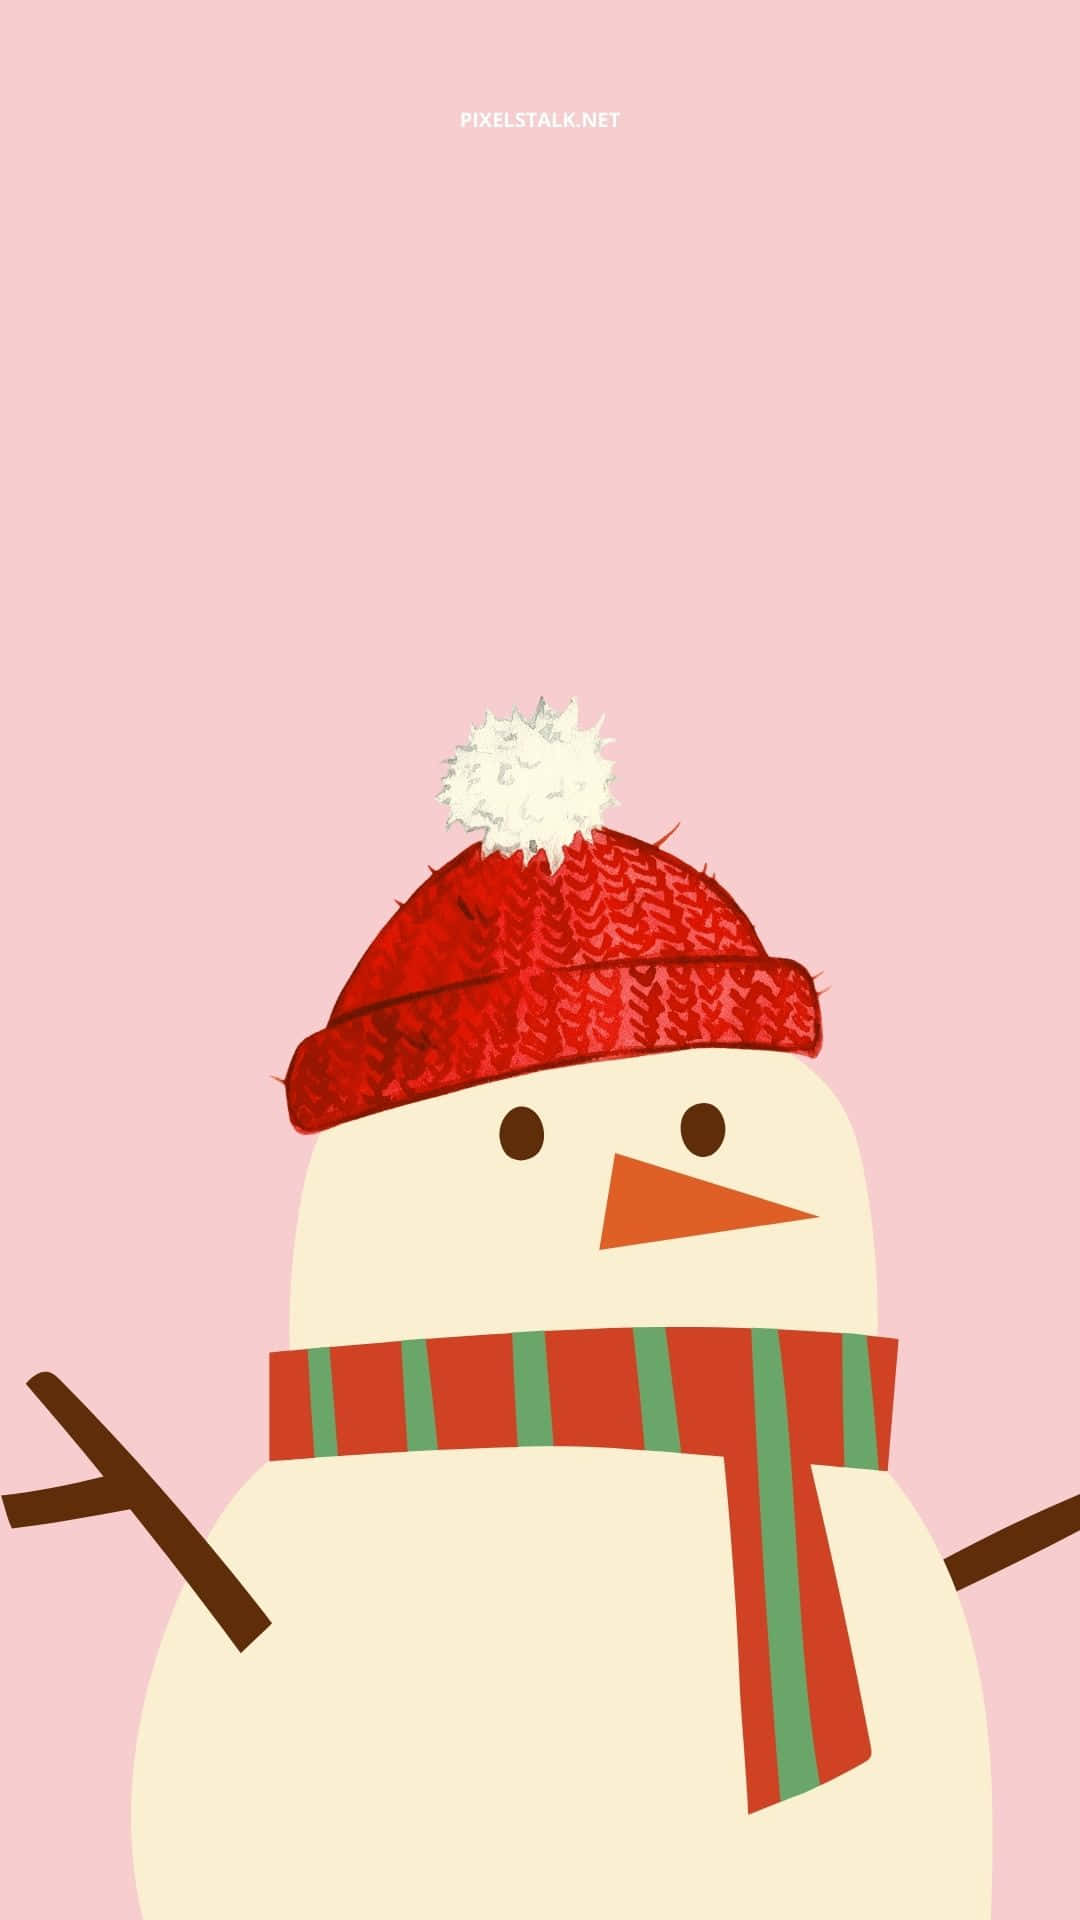 Cute Winter Snowman Wearing Red Hat Phone Background